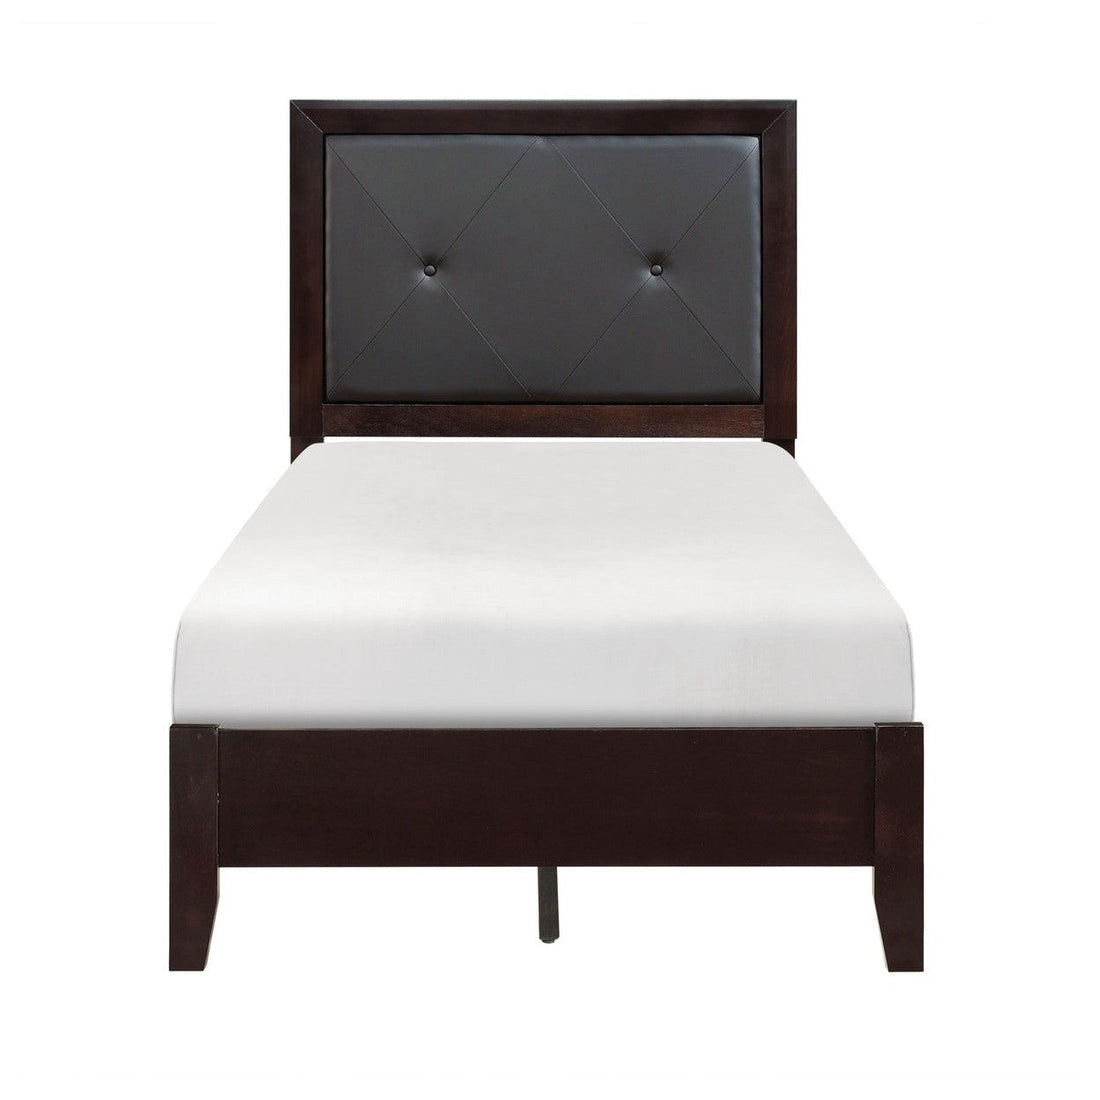 (3) TWIN BED, PVC HB 2145T-1*